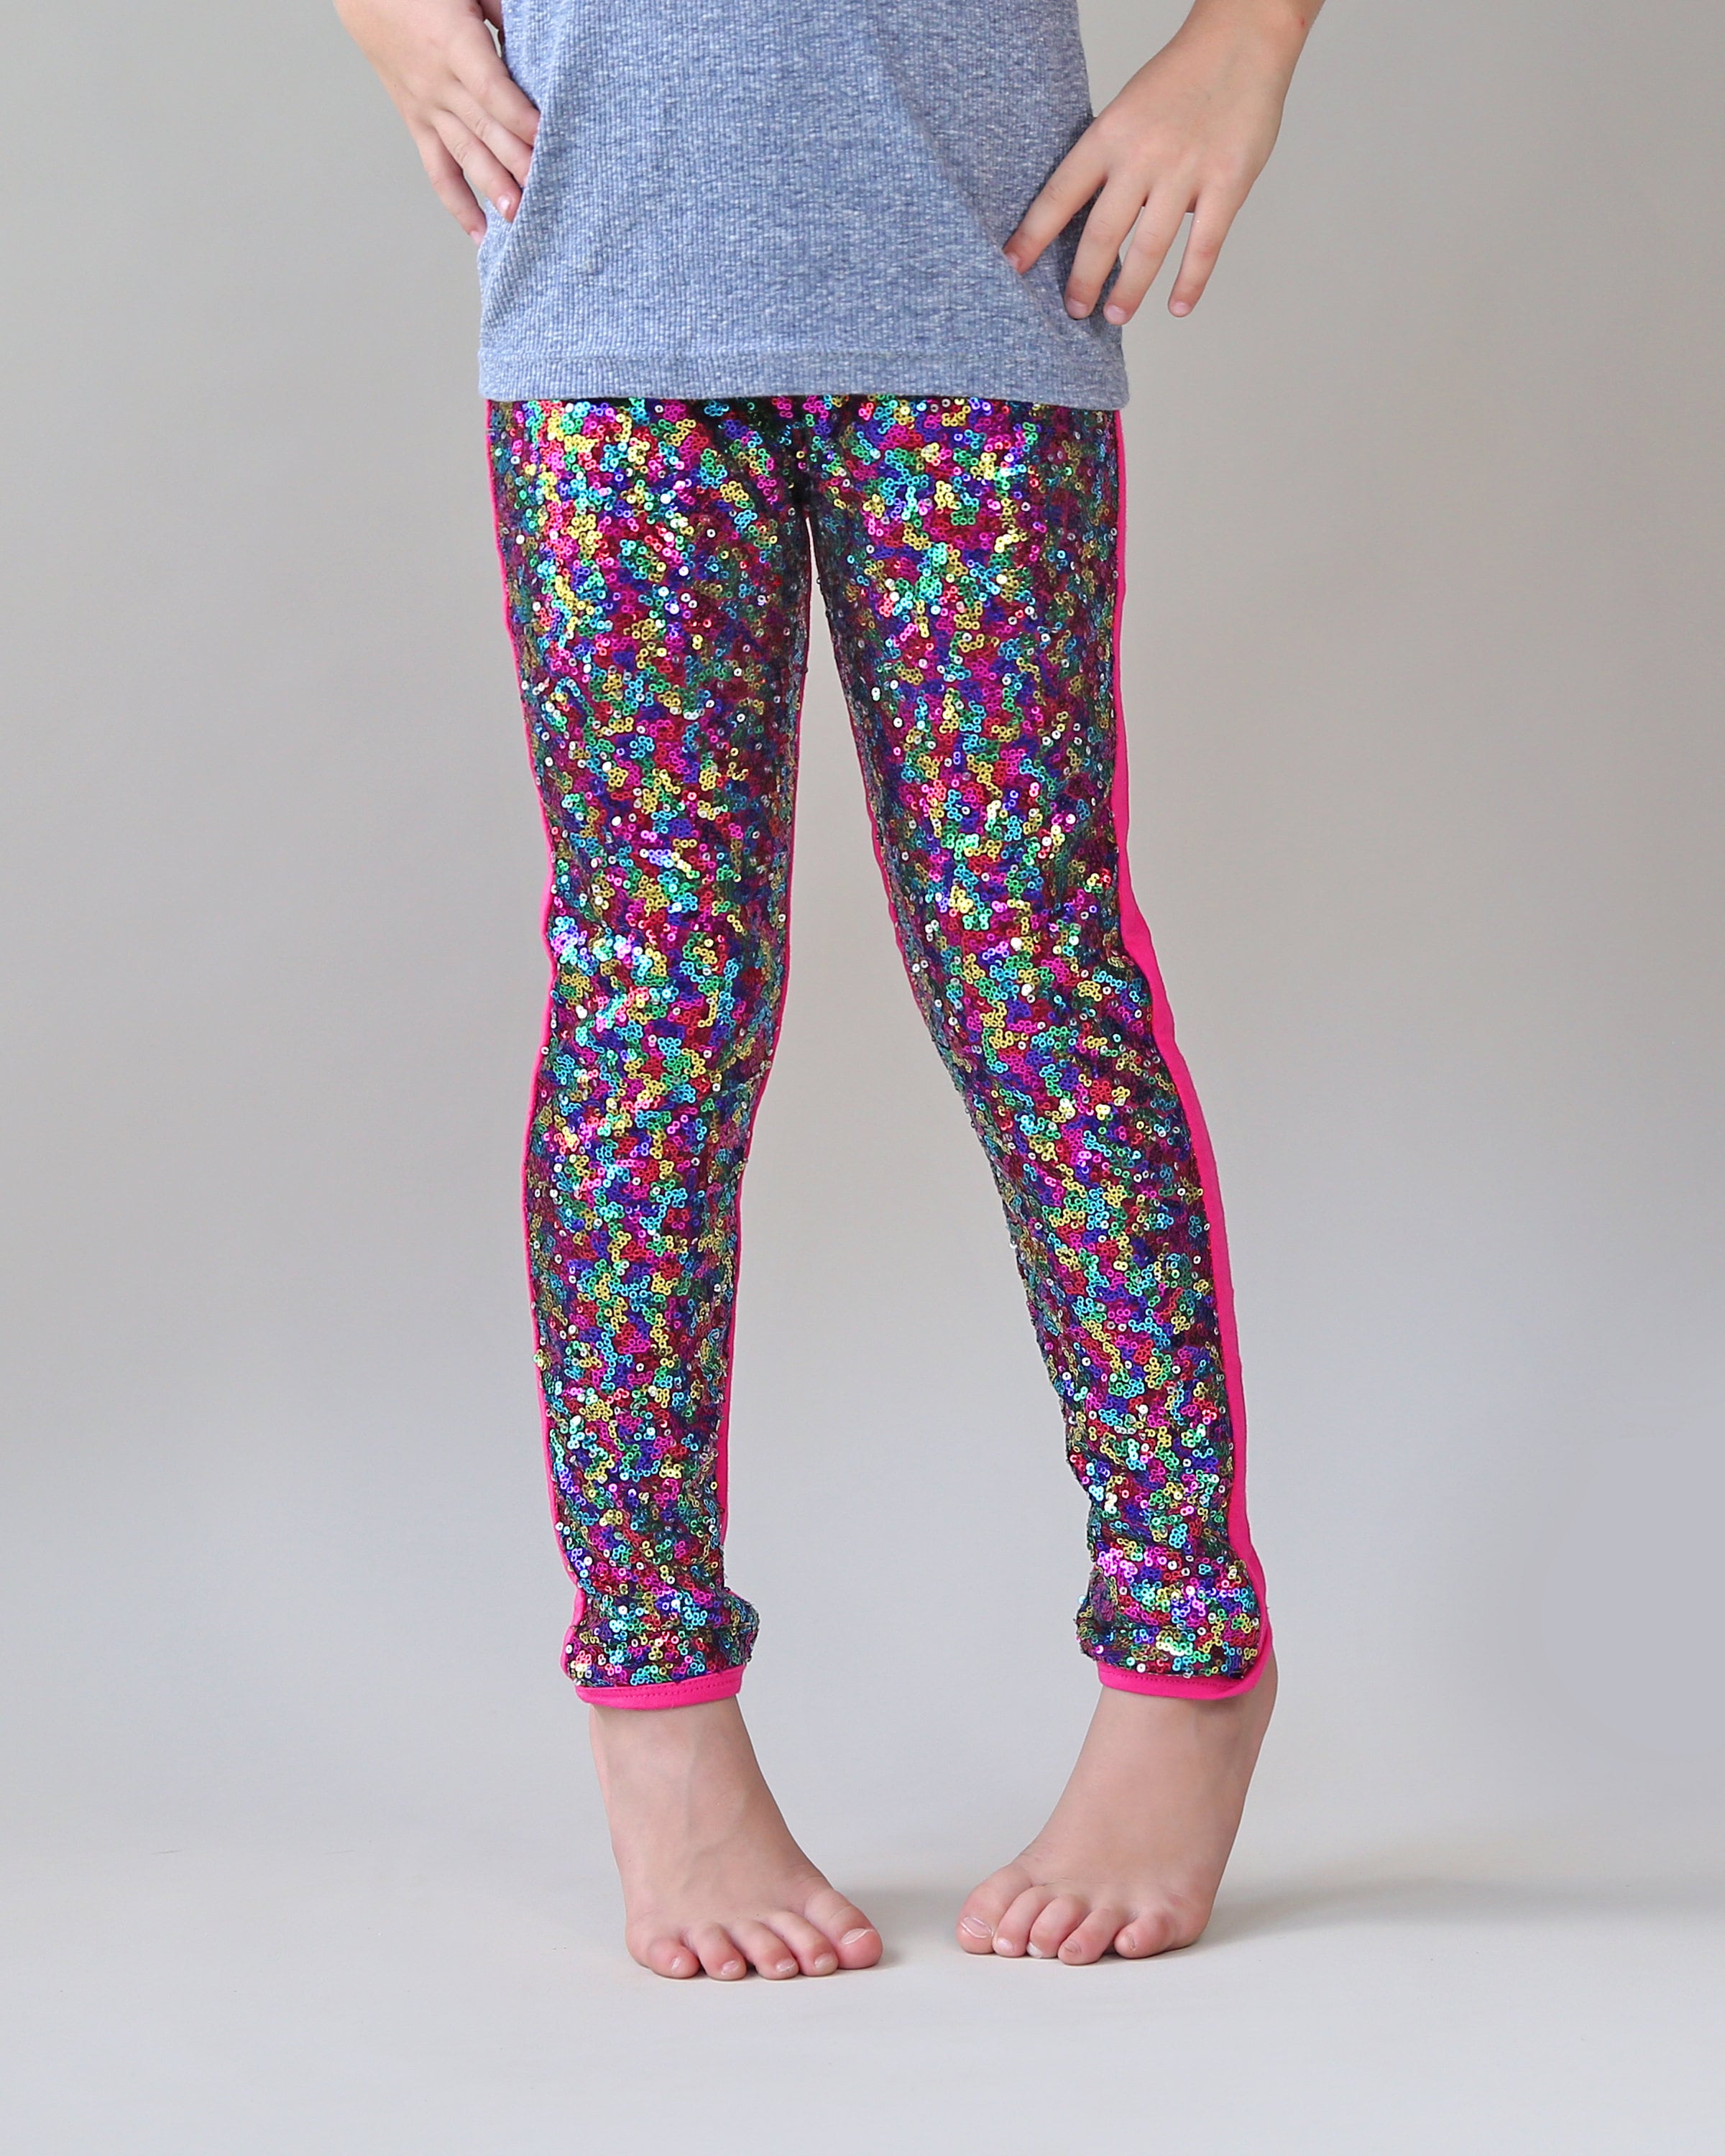  Rainbow Sequins Sparkles Glitter Baby Girls Toddler Leggings  Kids Yoga Pants Dance Active Tights 4T: Clothing, Shoes & Jewelry